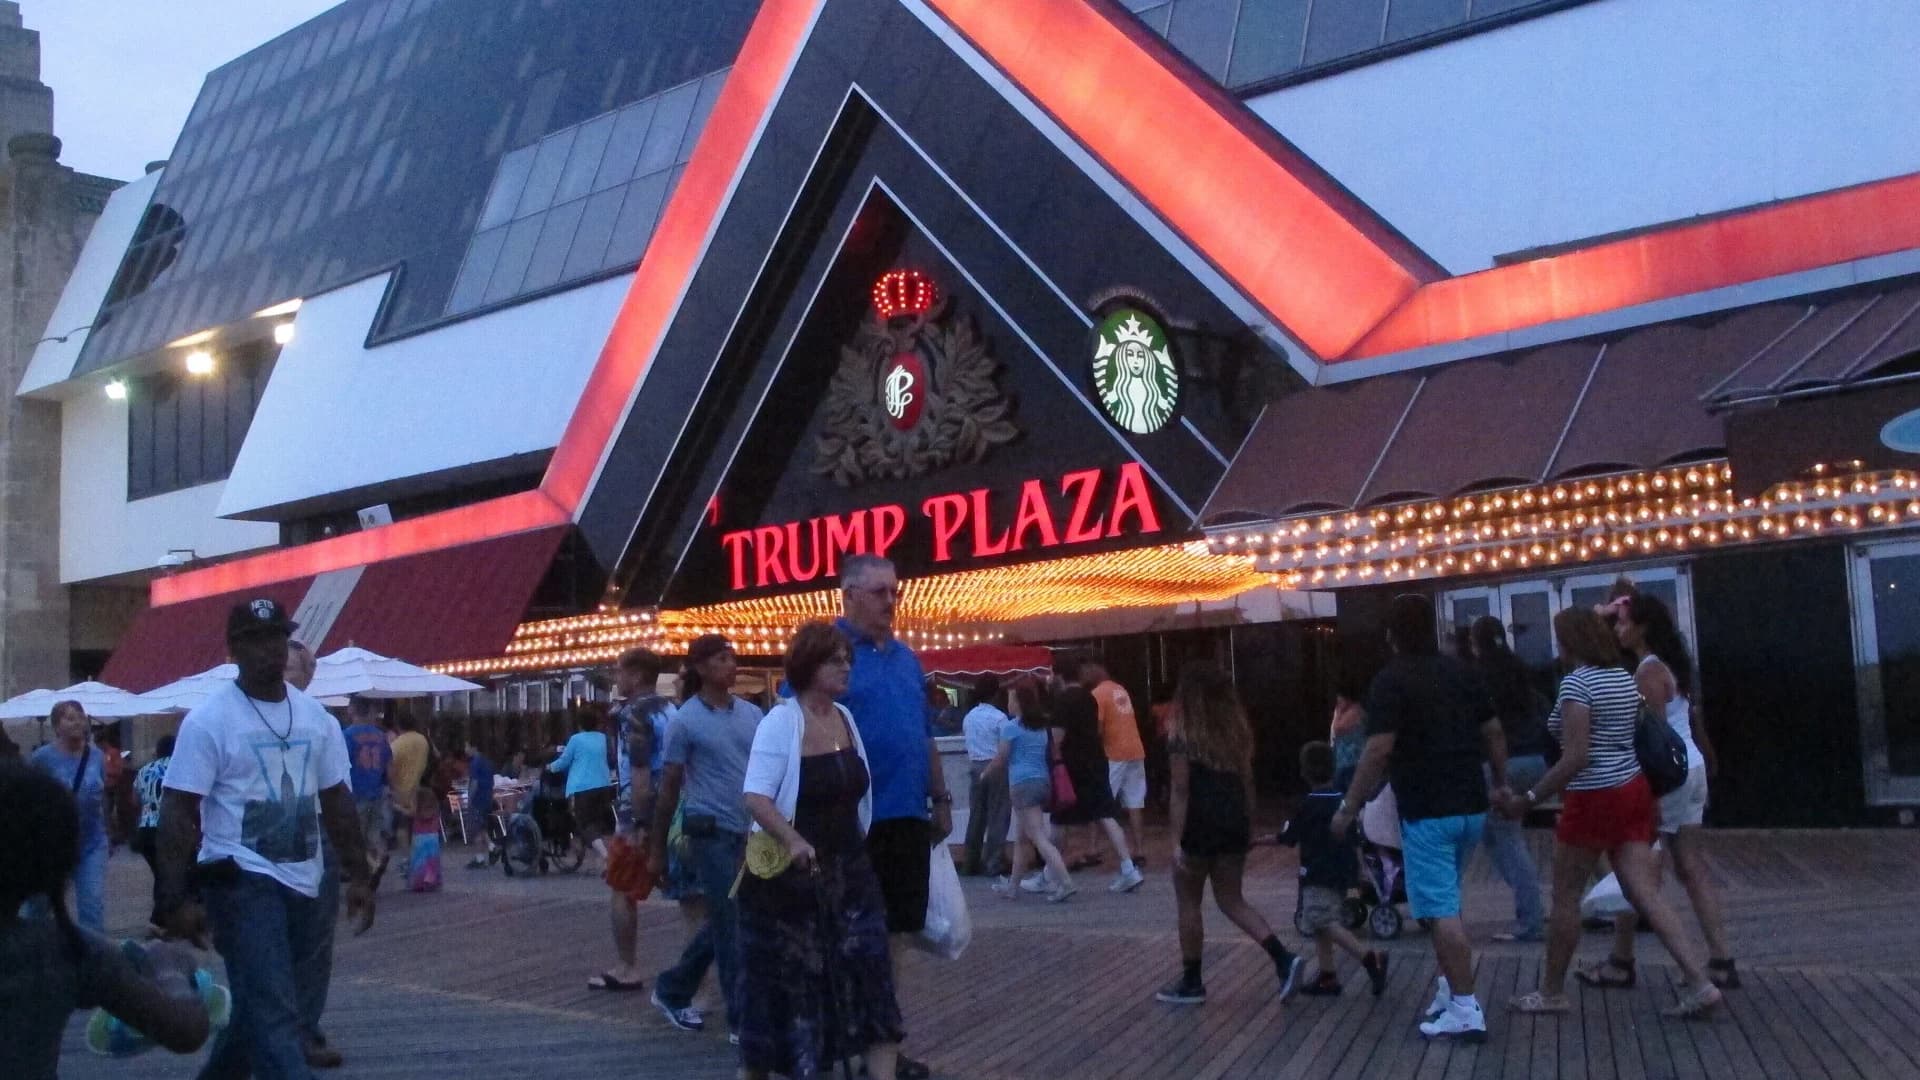 Former Trump Plaza casino in Atlantic City to be imploded on Feb. 17